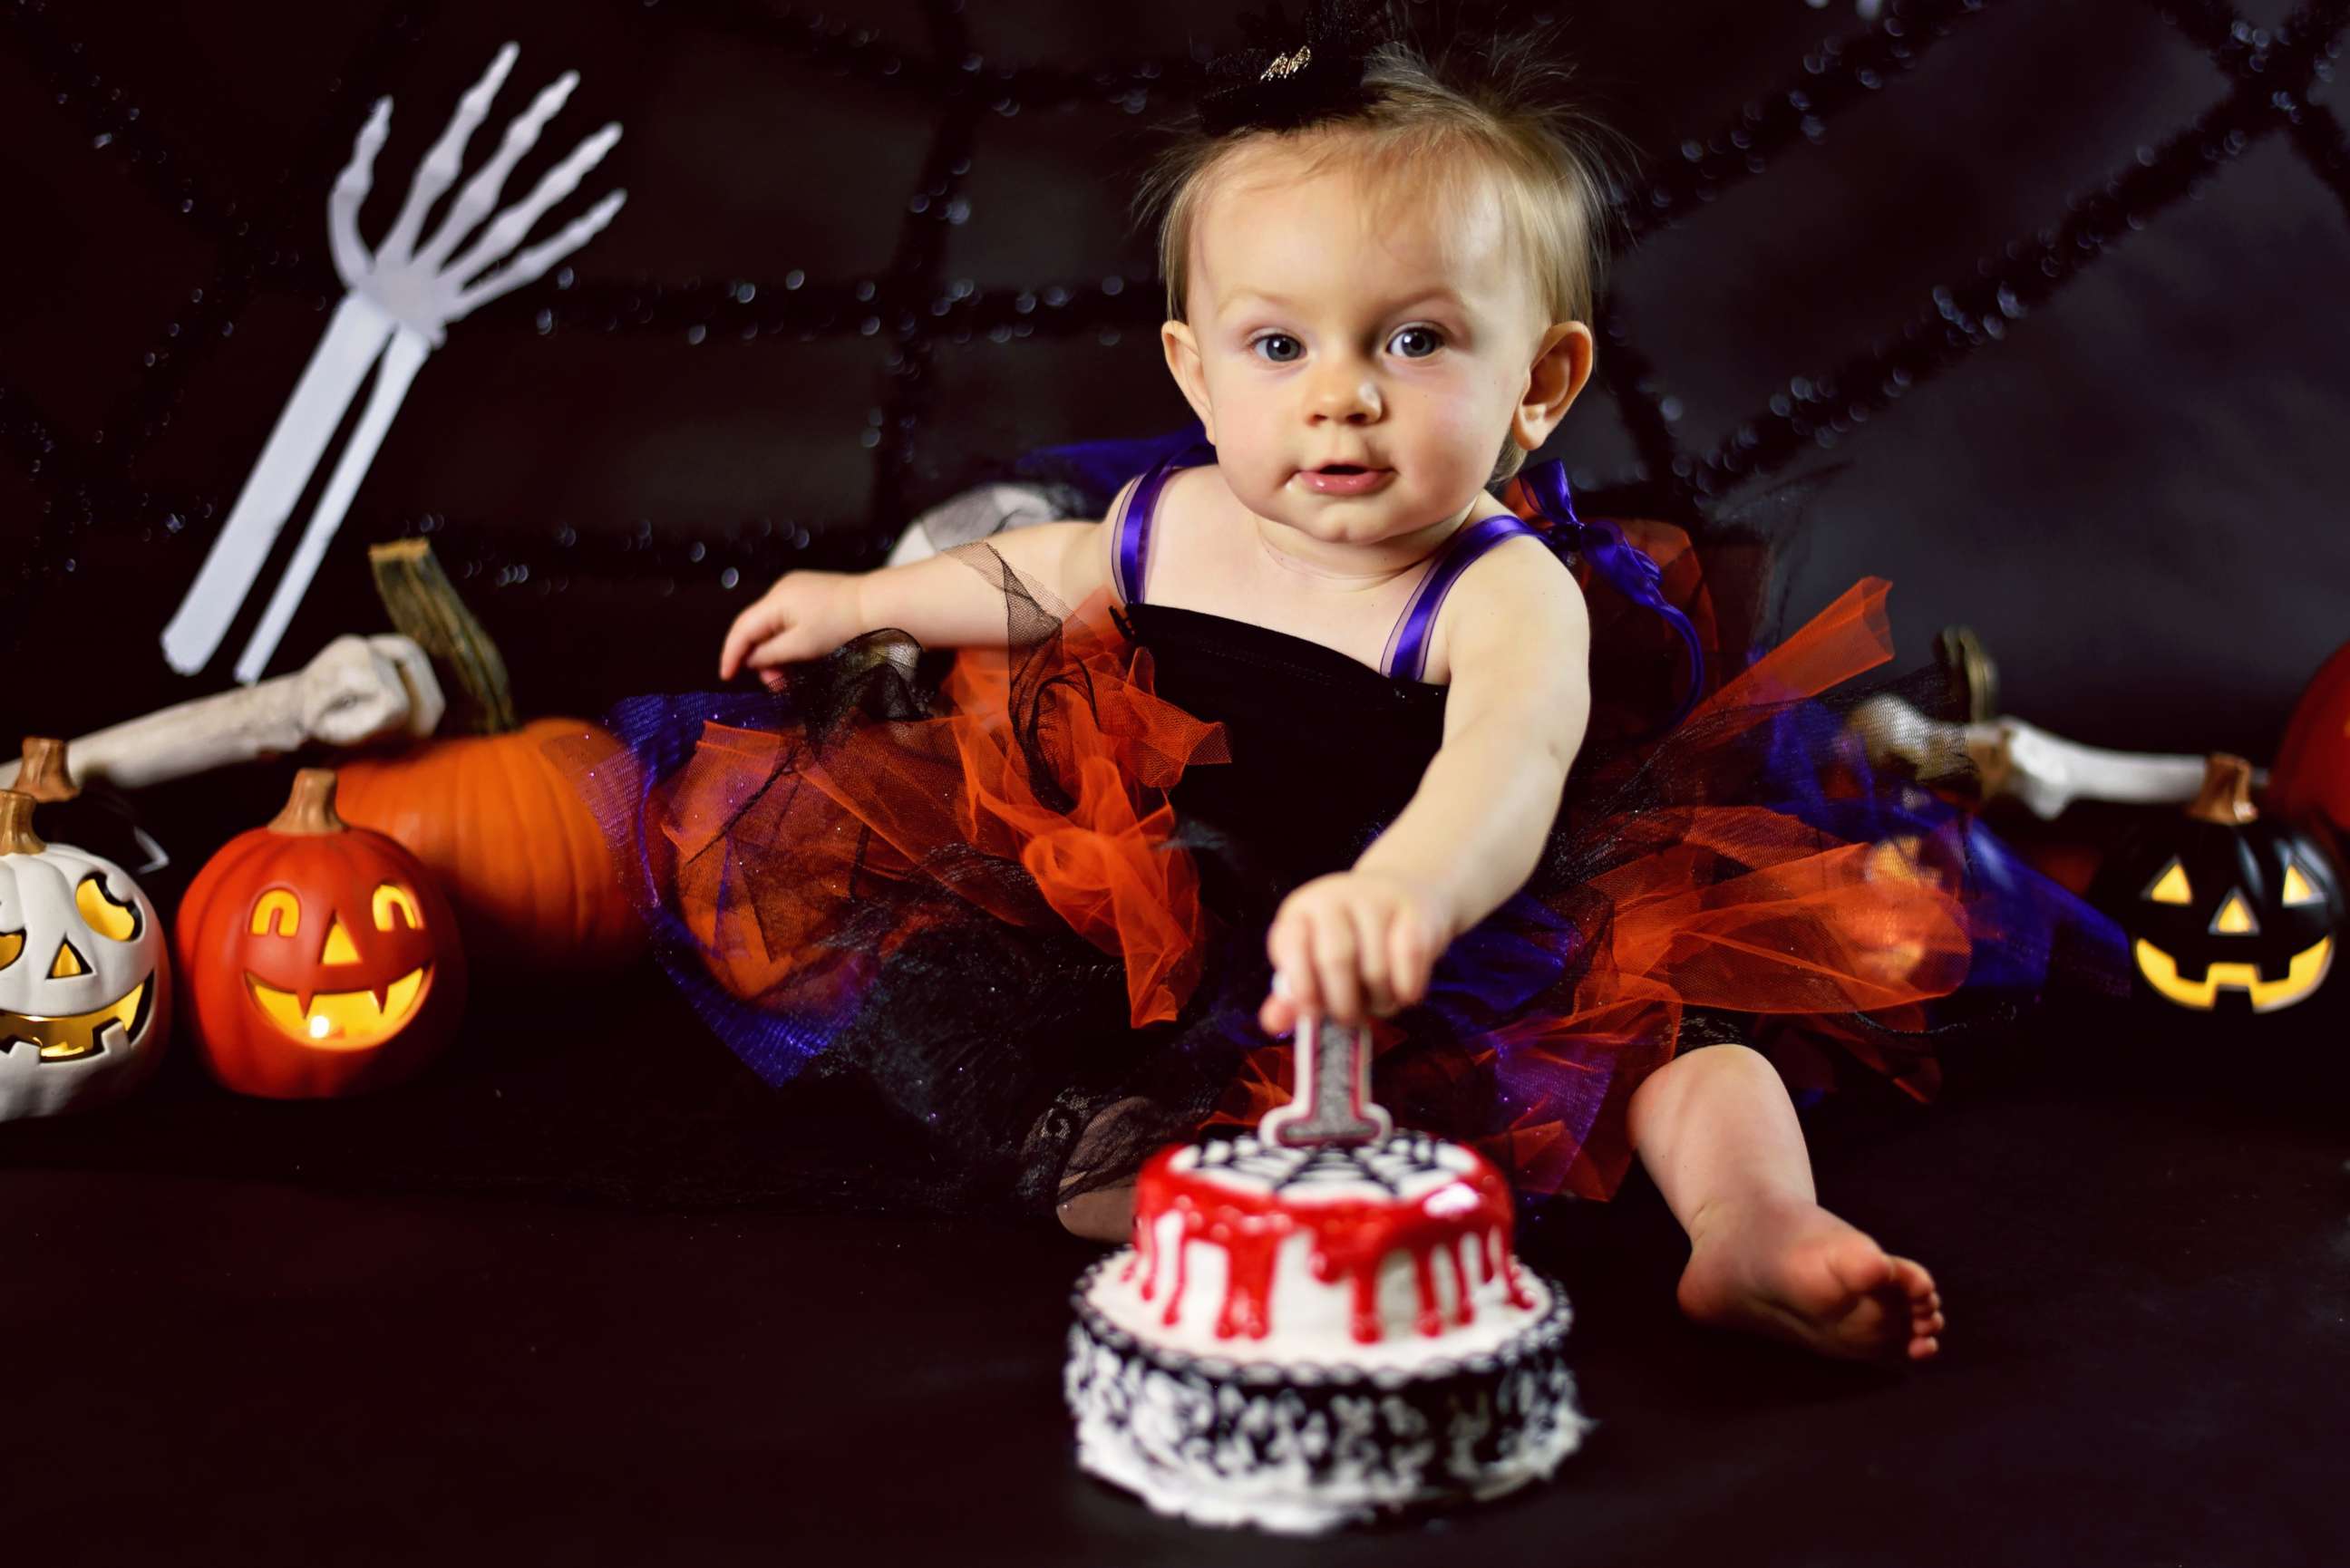 PHOTO: Sydney from South Bend, Indiana, had a haunted Halloween cake smash for her first birthday.